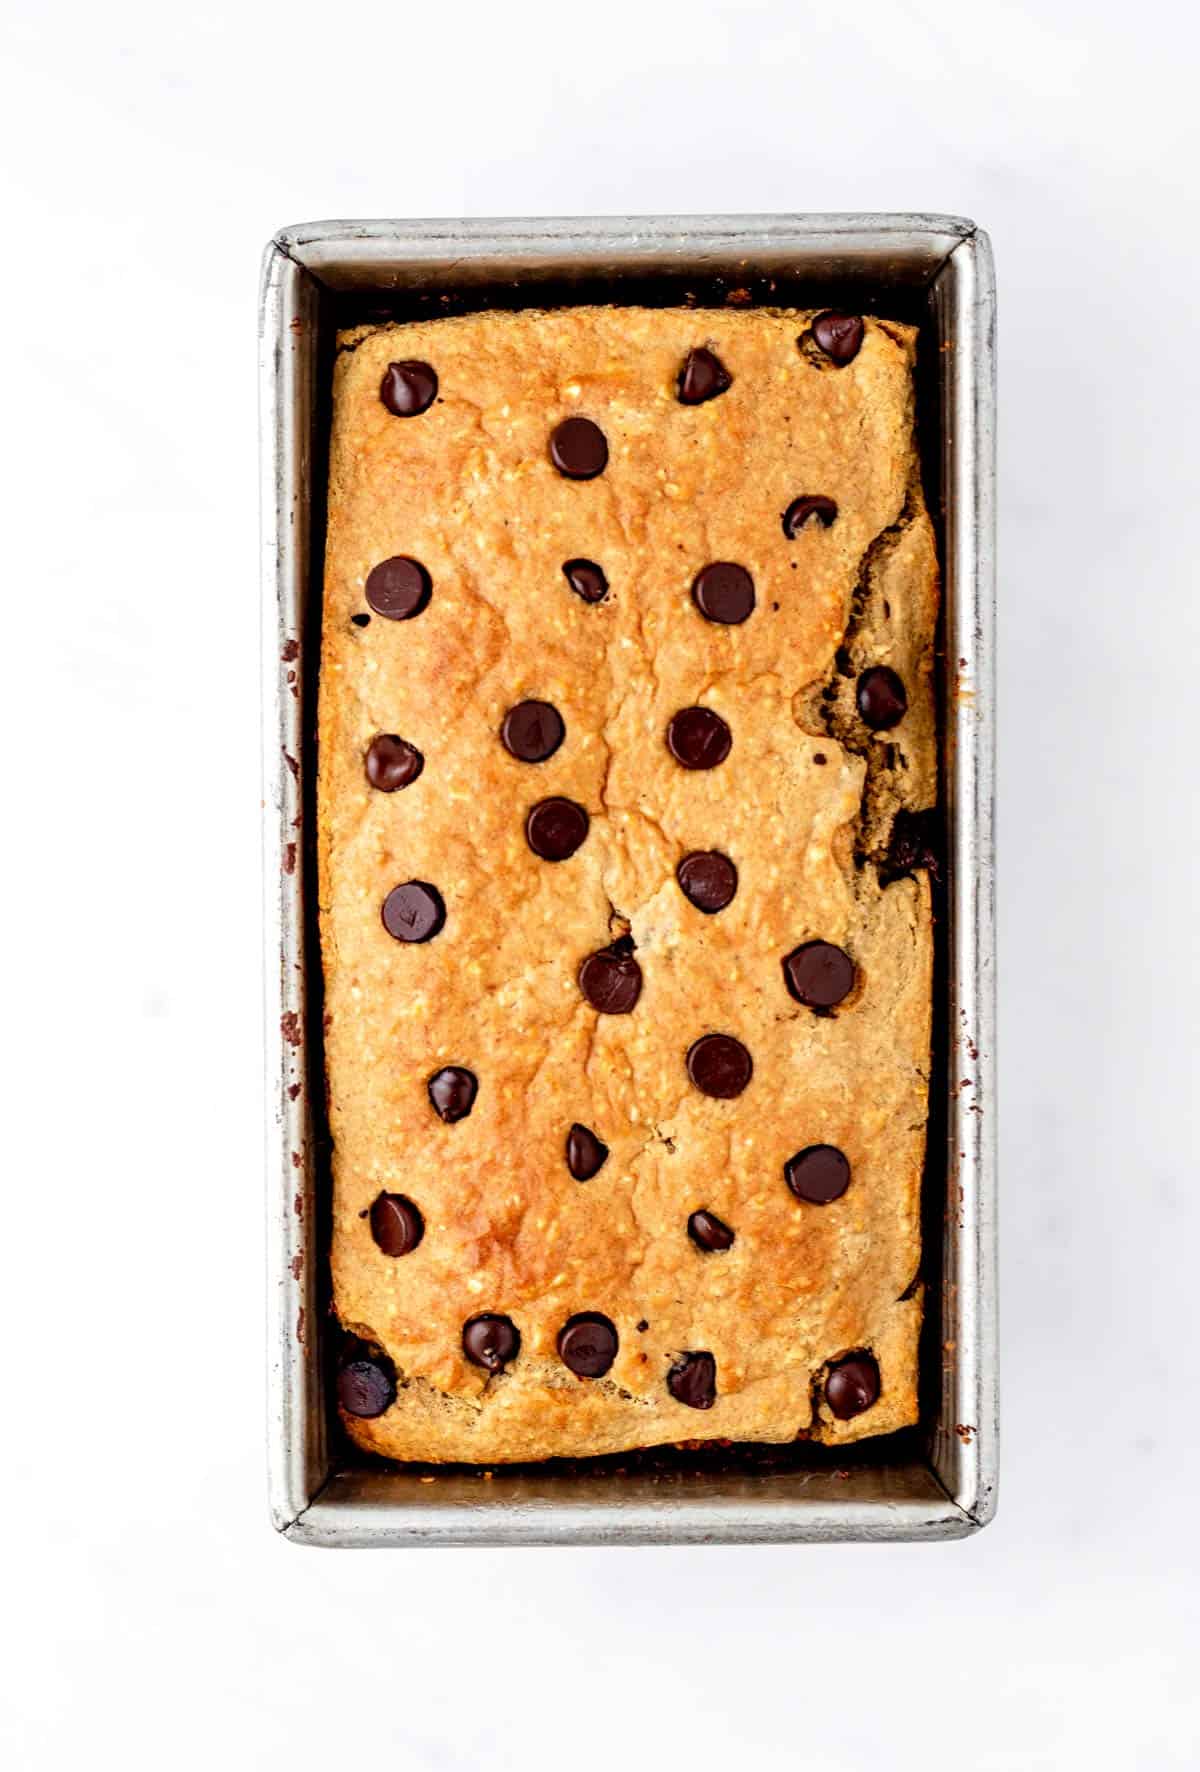 Baked protein banana bread in a loaf pan with chocolate chips.